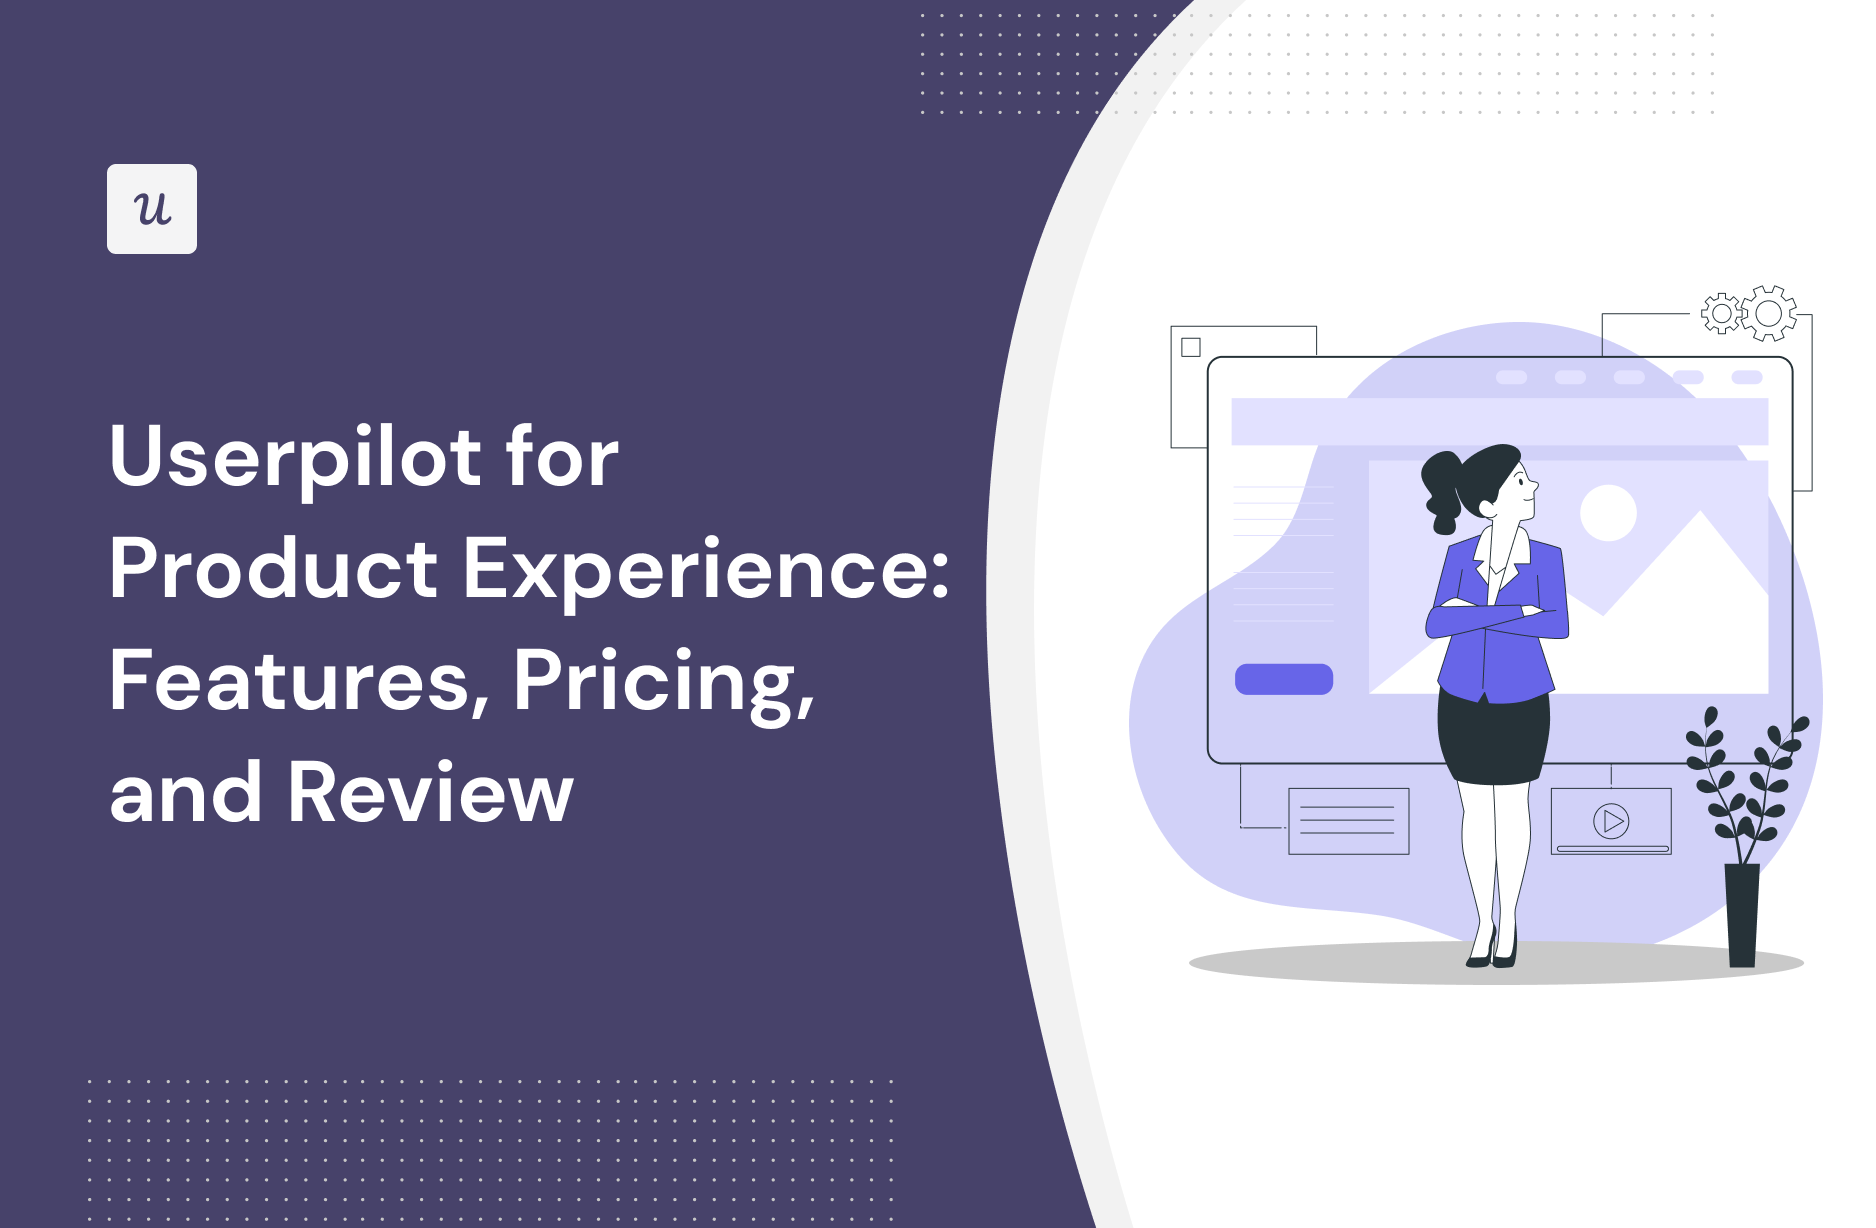 Userpilot for Product Experience: Features, Pricing, and Review